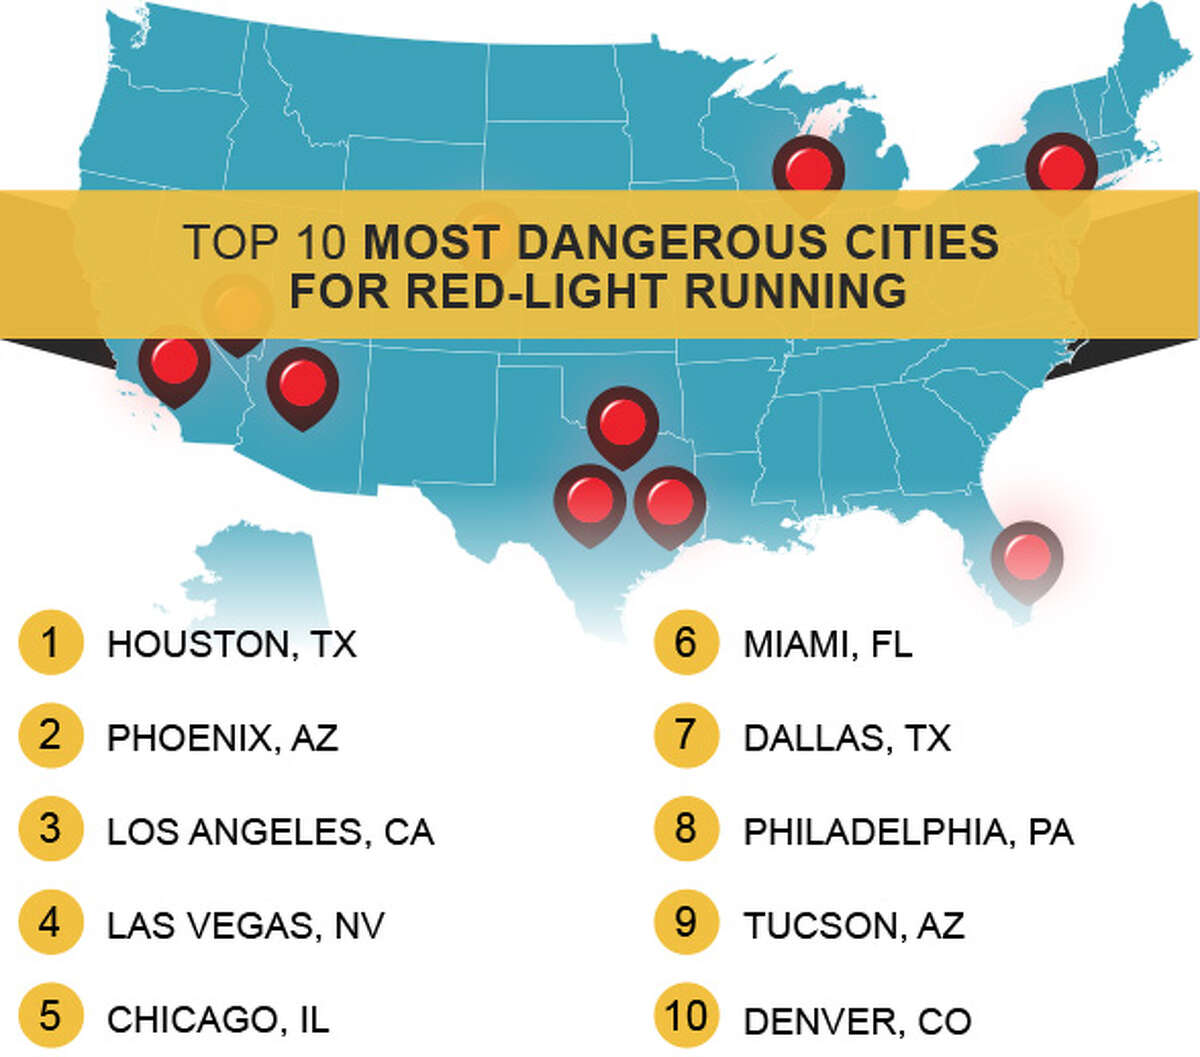 Houston is the nation's most dangerous city for red-light runners, with 181 fatalities between 2004 and 2013. Source: National Coalition for Safer Roads